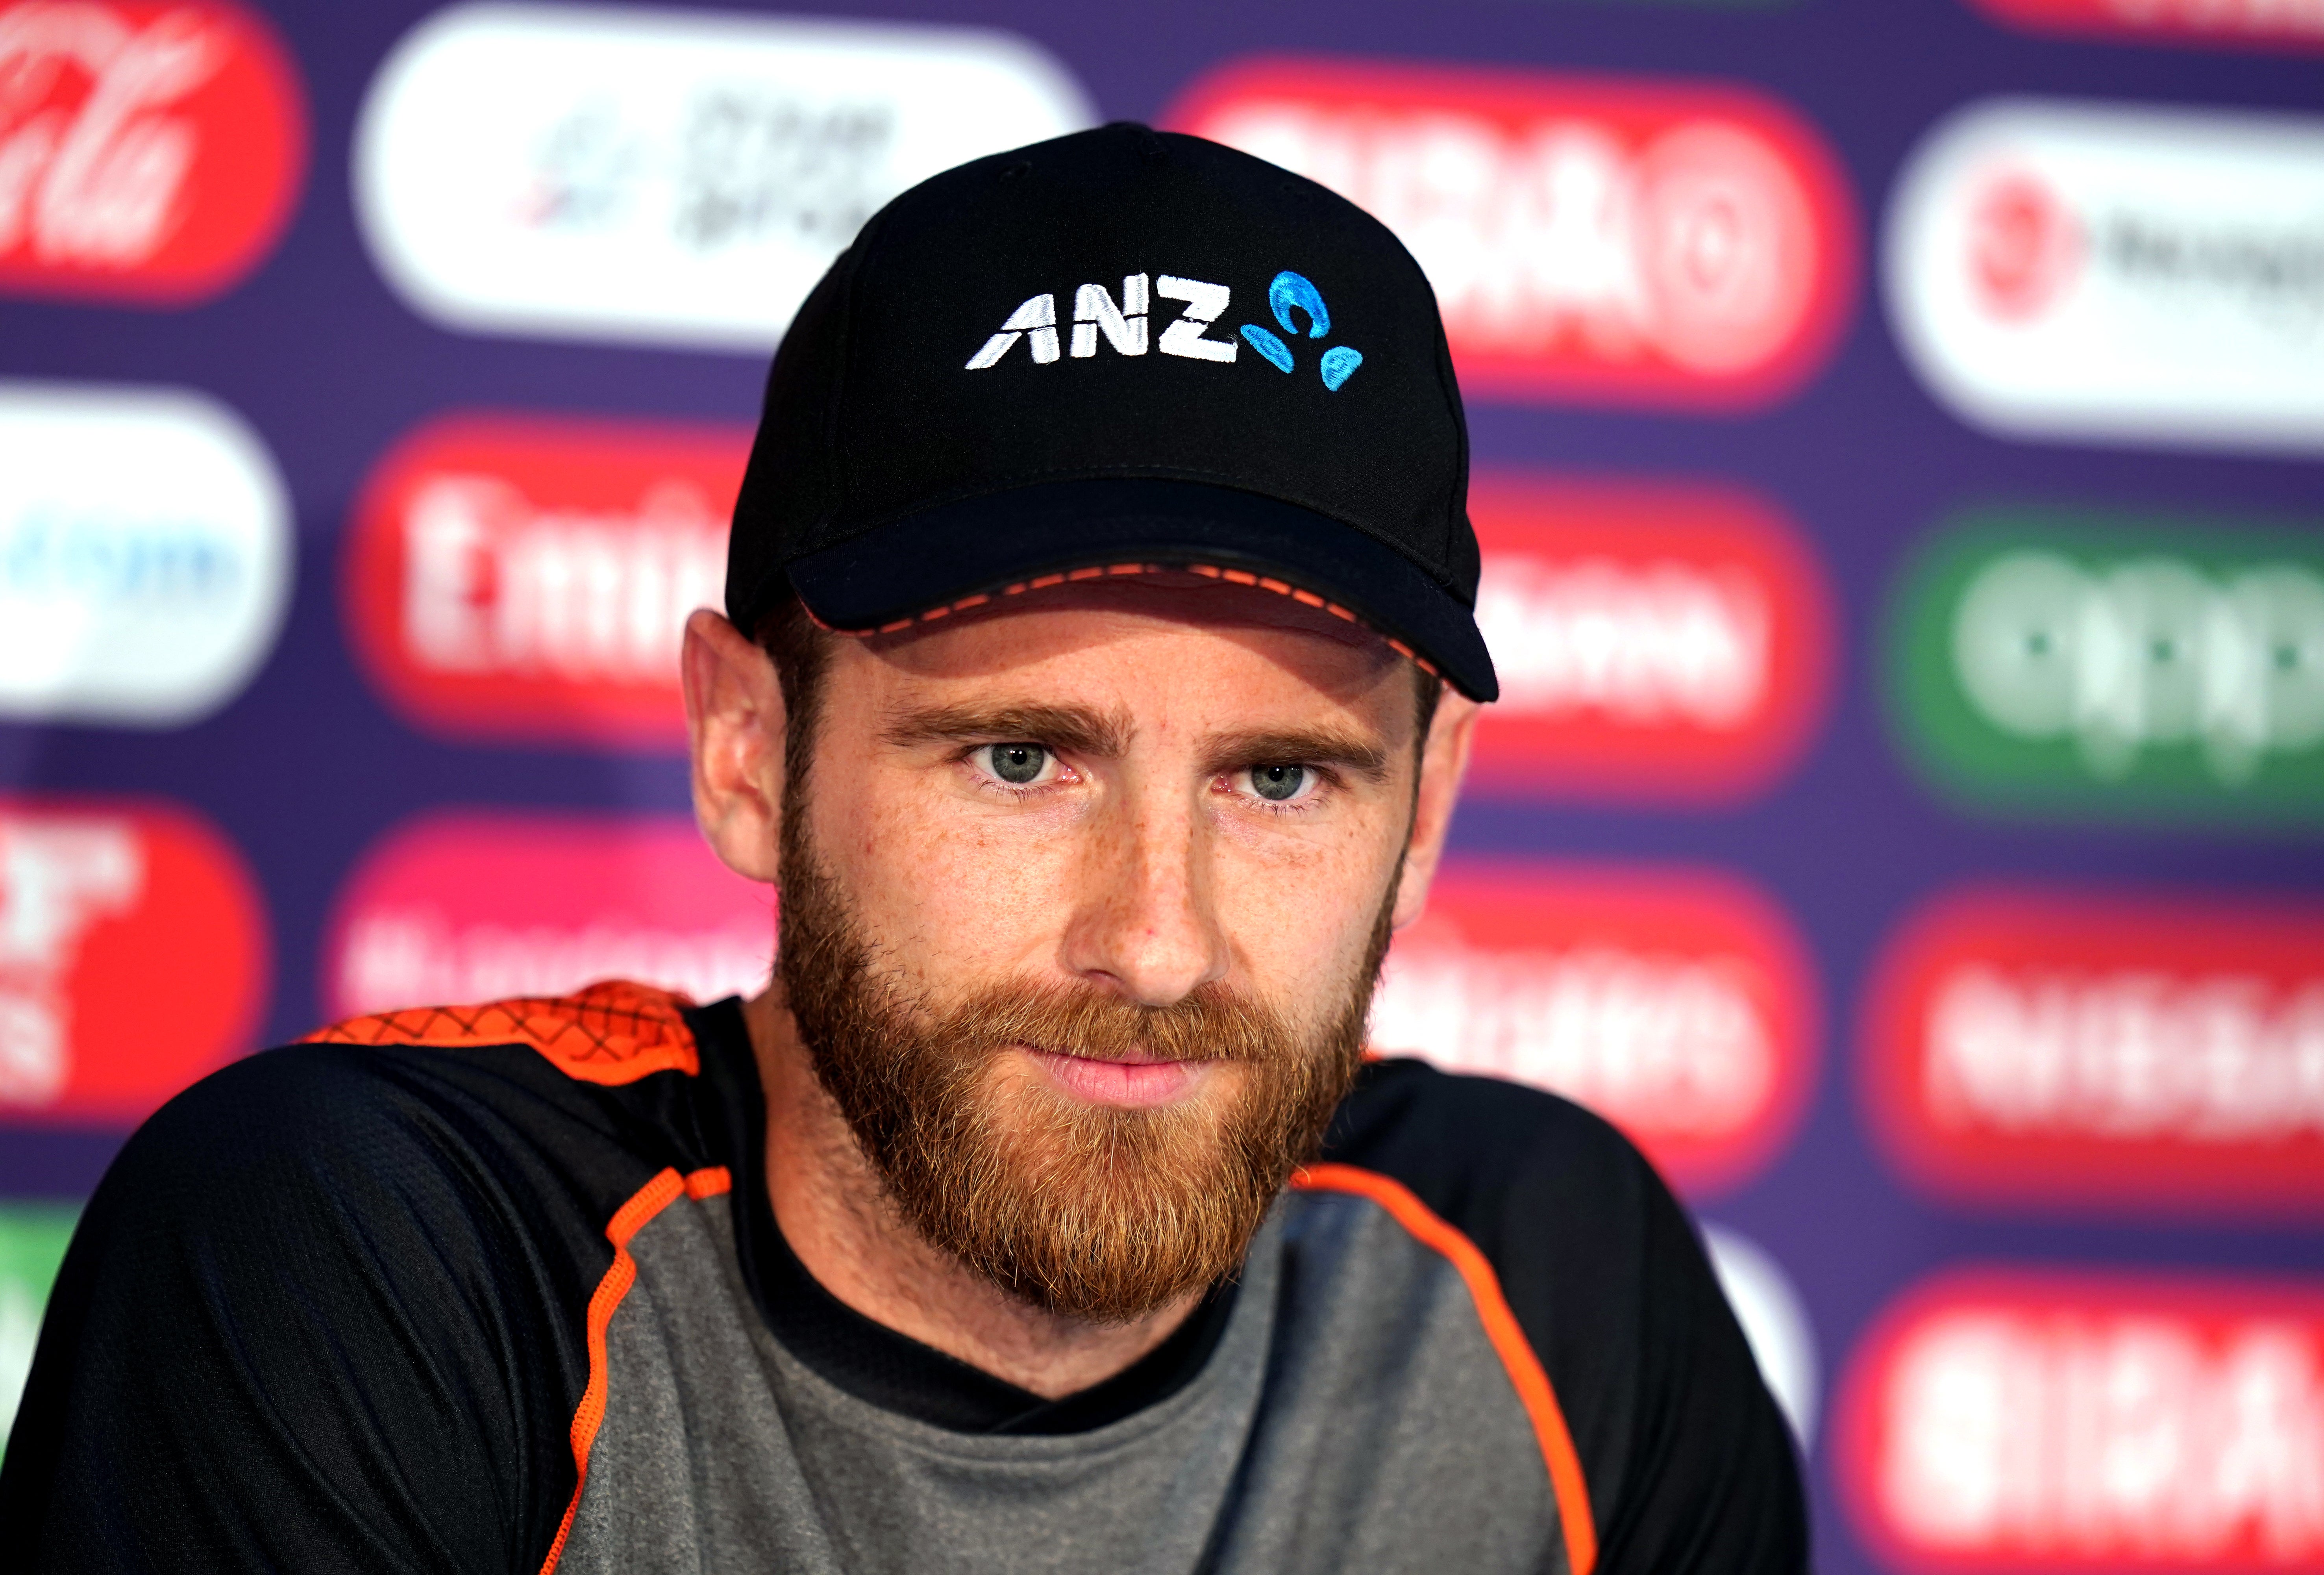 New Zealand will meet England again in the T20 World Cup semi-final